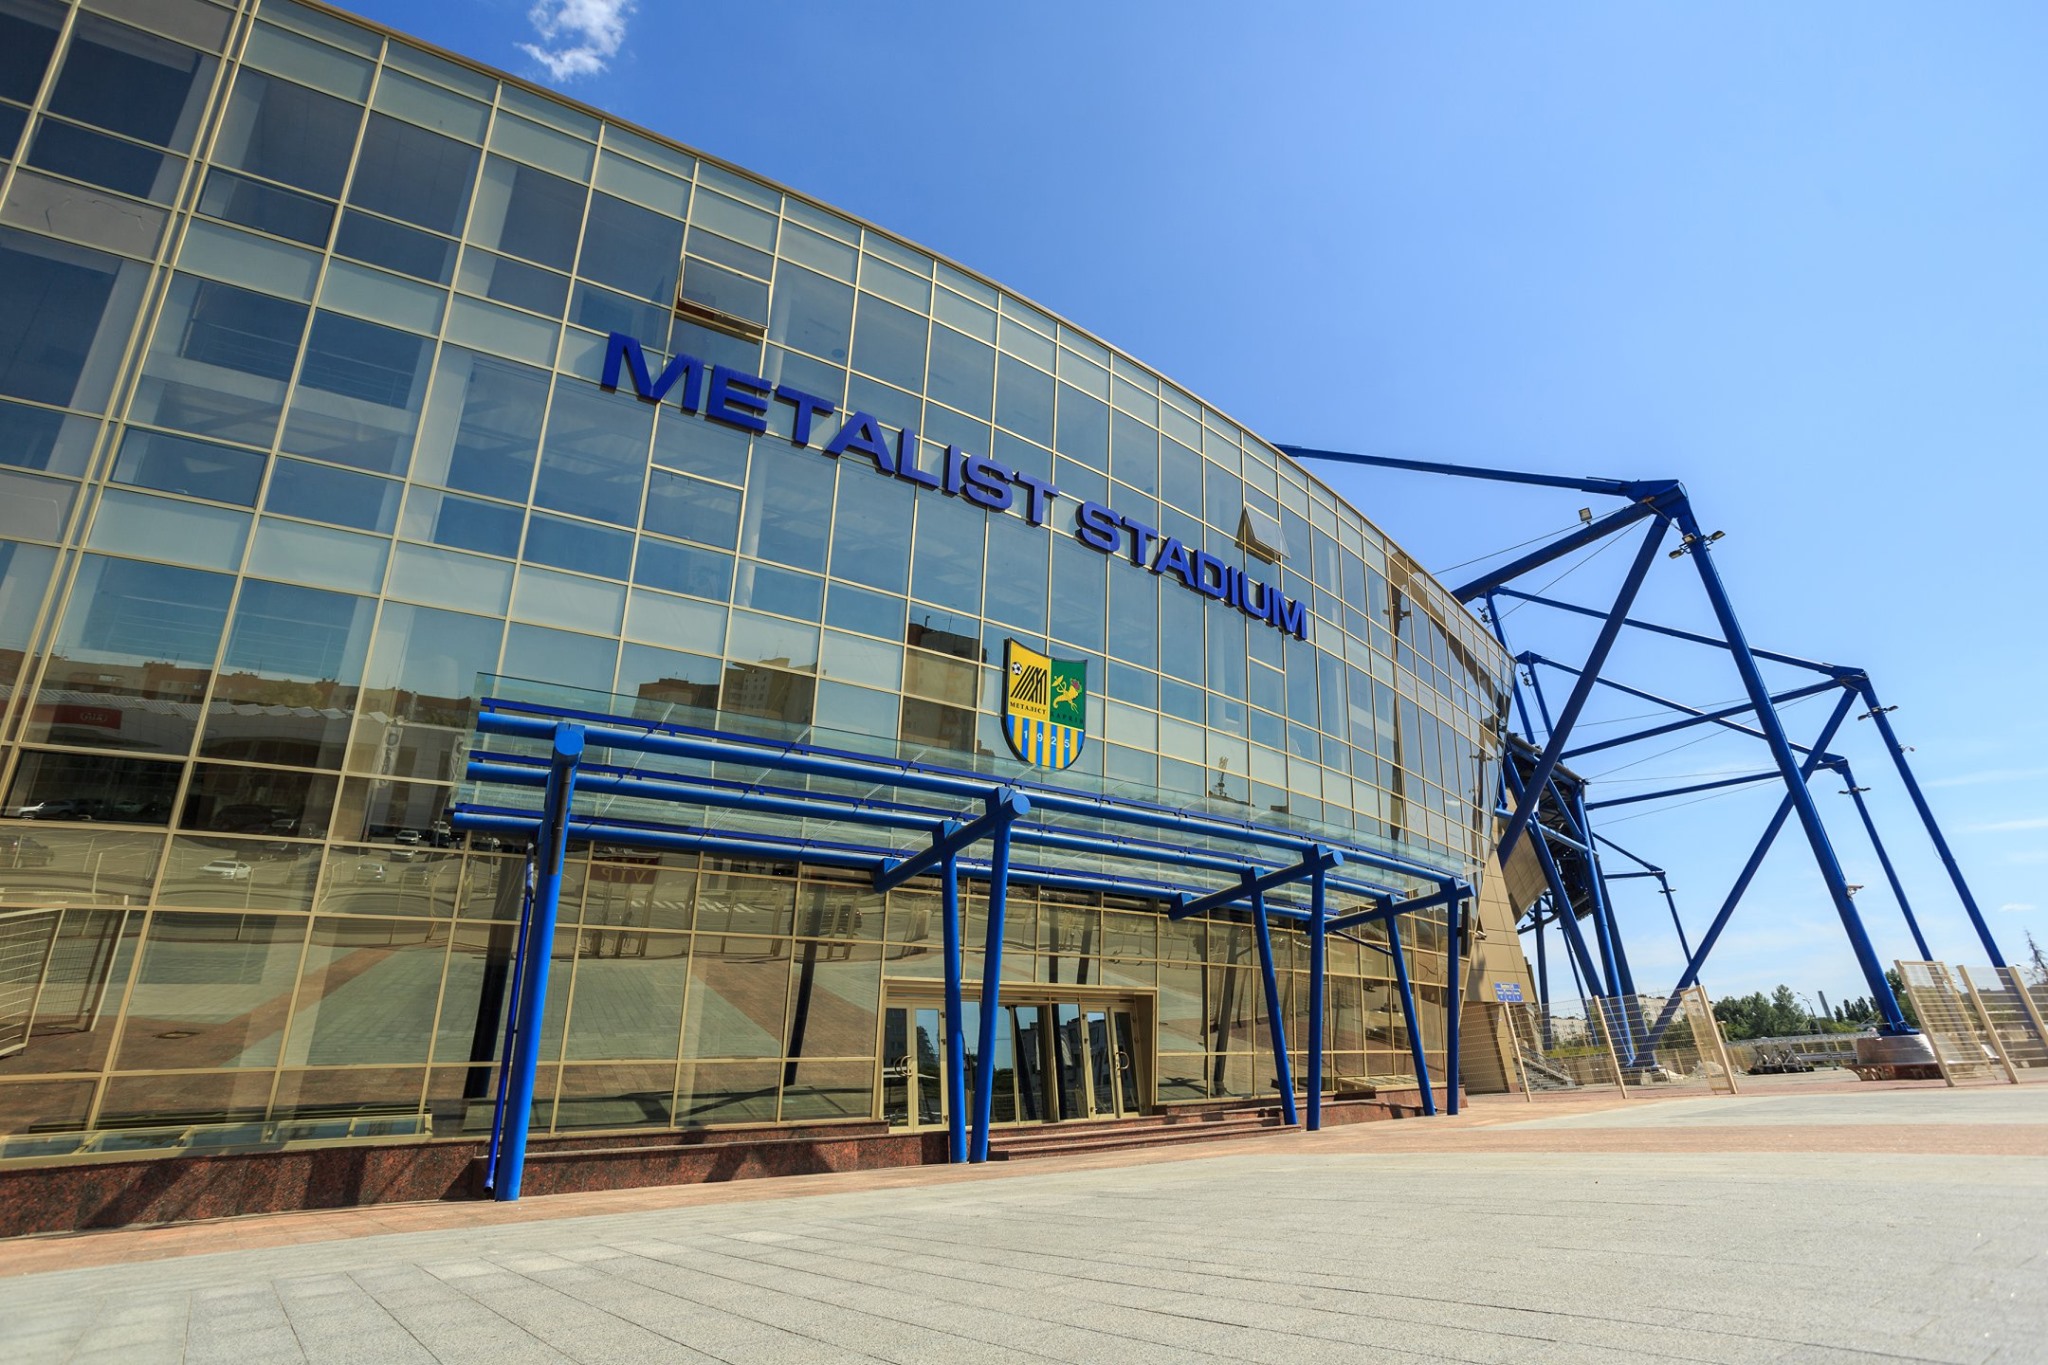 Metalist Oblast Sports Complex | Stadiums | top images of our world!